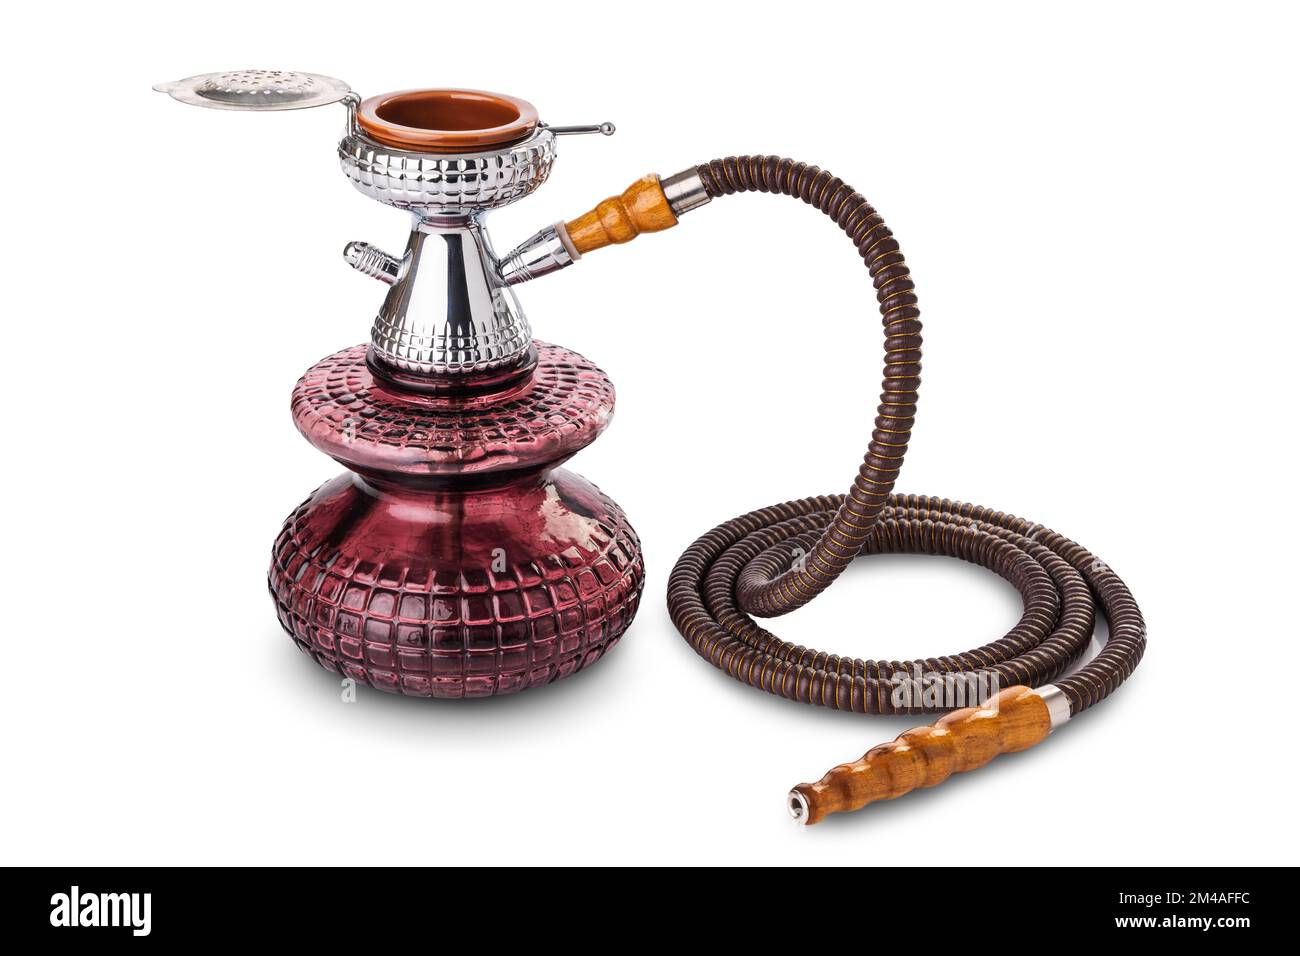 Shisha smoking Cut Out Stock Images & Pictures - Alamy